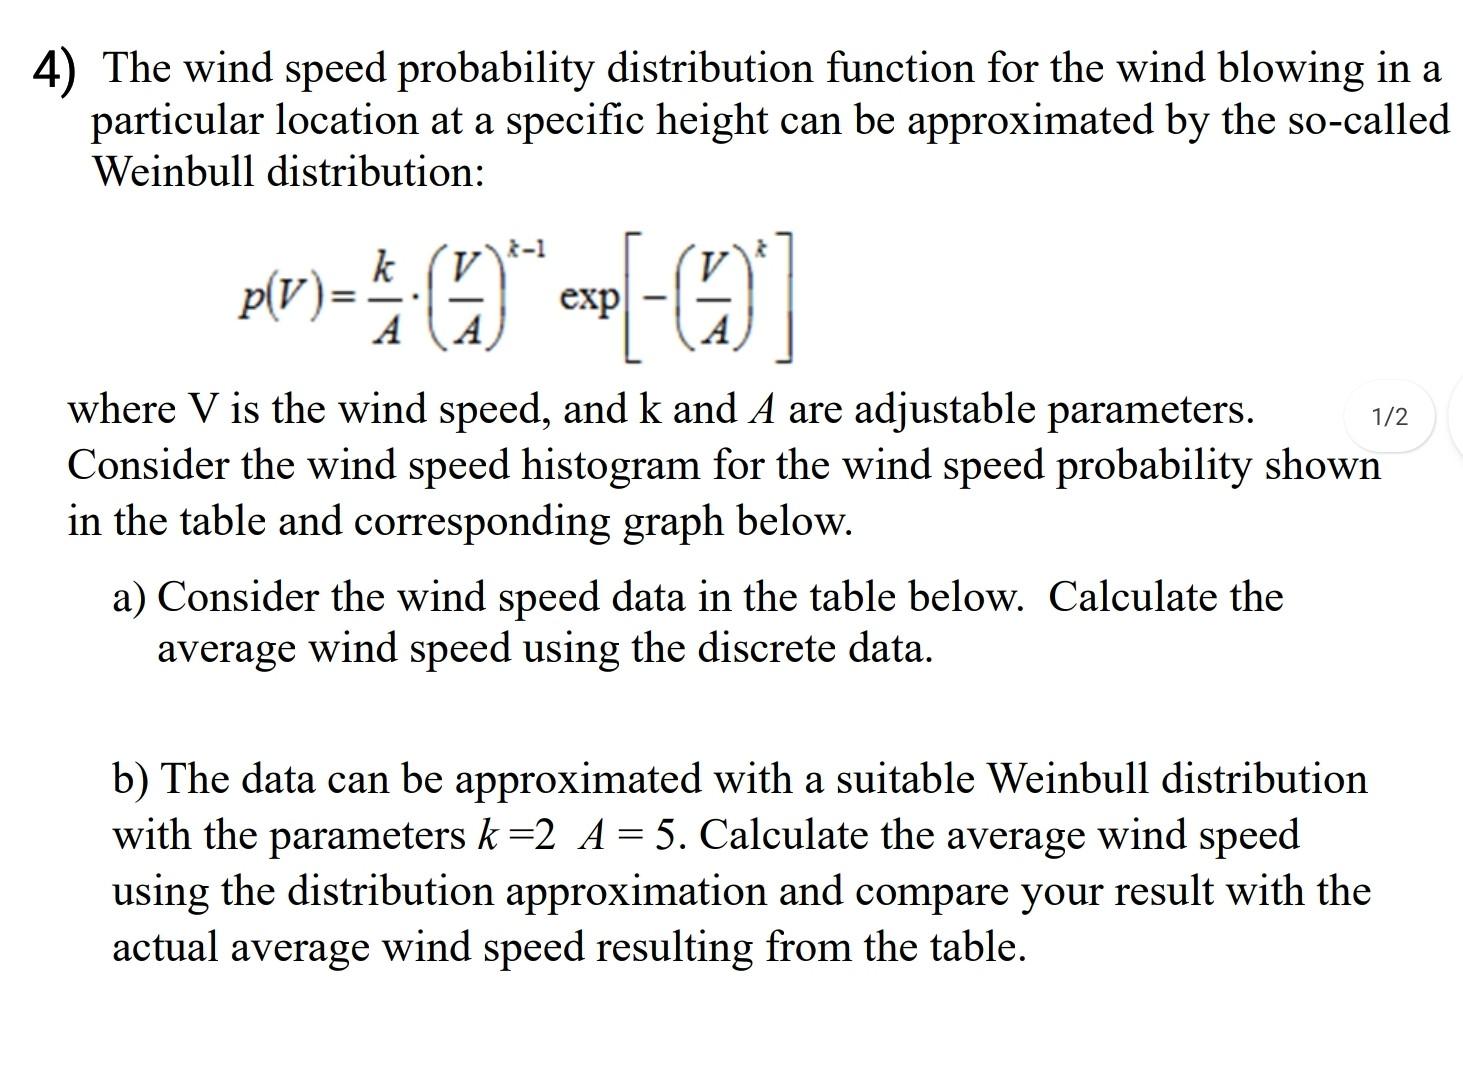 4 The Wind Speed Probability Distribution Function For The Wind Blowing In A Particular Location 1